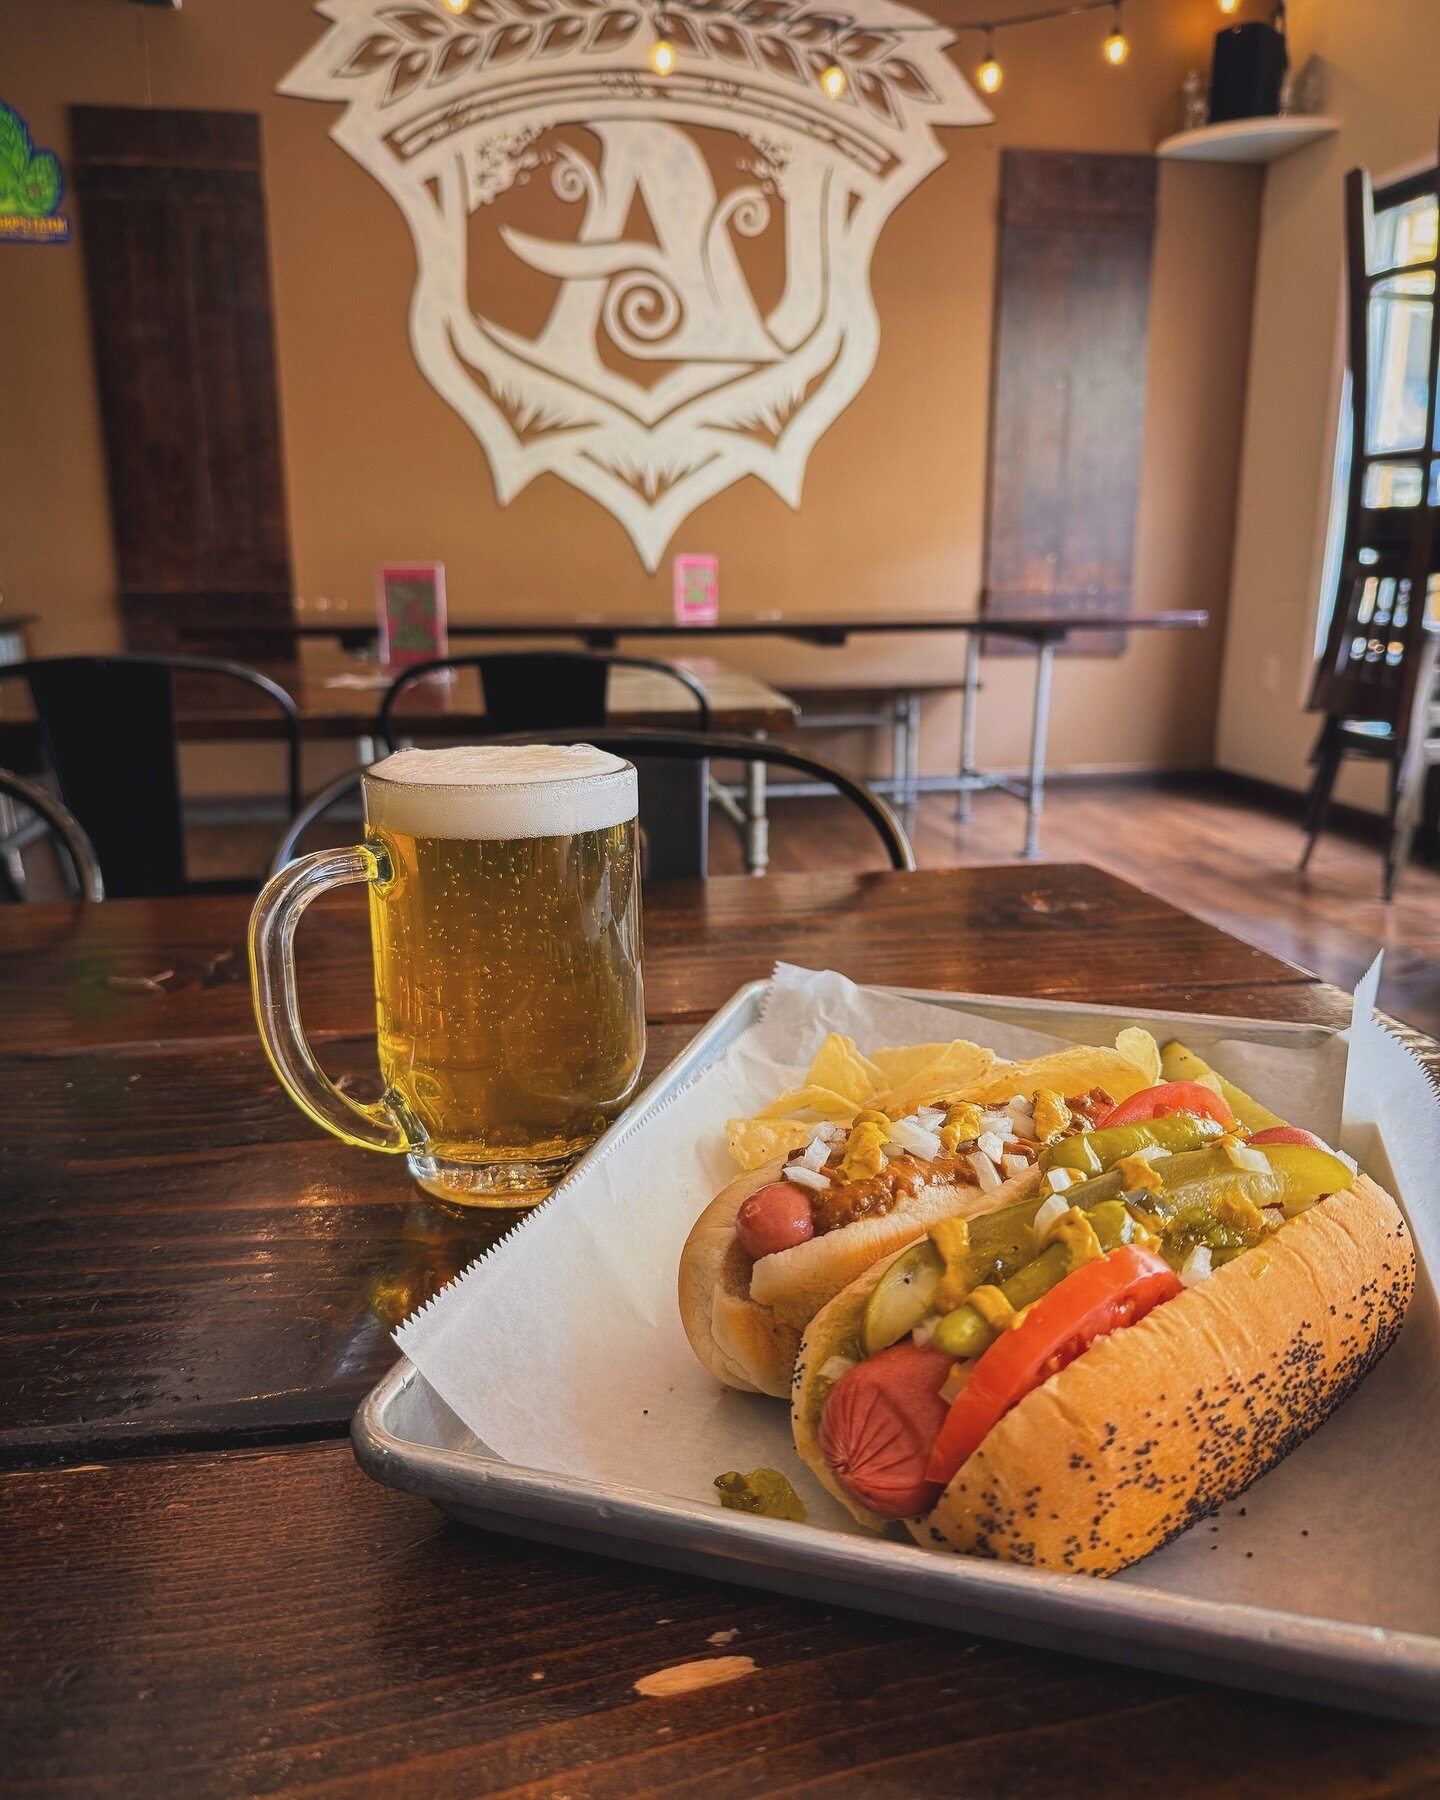 Couldn&rsquo;t make it to the ballpark for #openingday today? That&rsquo;s alright, we gotchu! 

Crispy lagers on draft (THREE of &rsquo;em!) and Chef Marc comin&rsquo; in HOT with Detroit-style coneys and Chicago-style hot dogs available all weekend